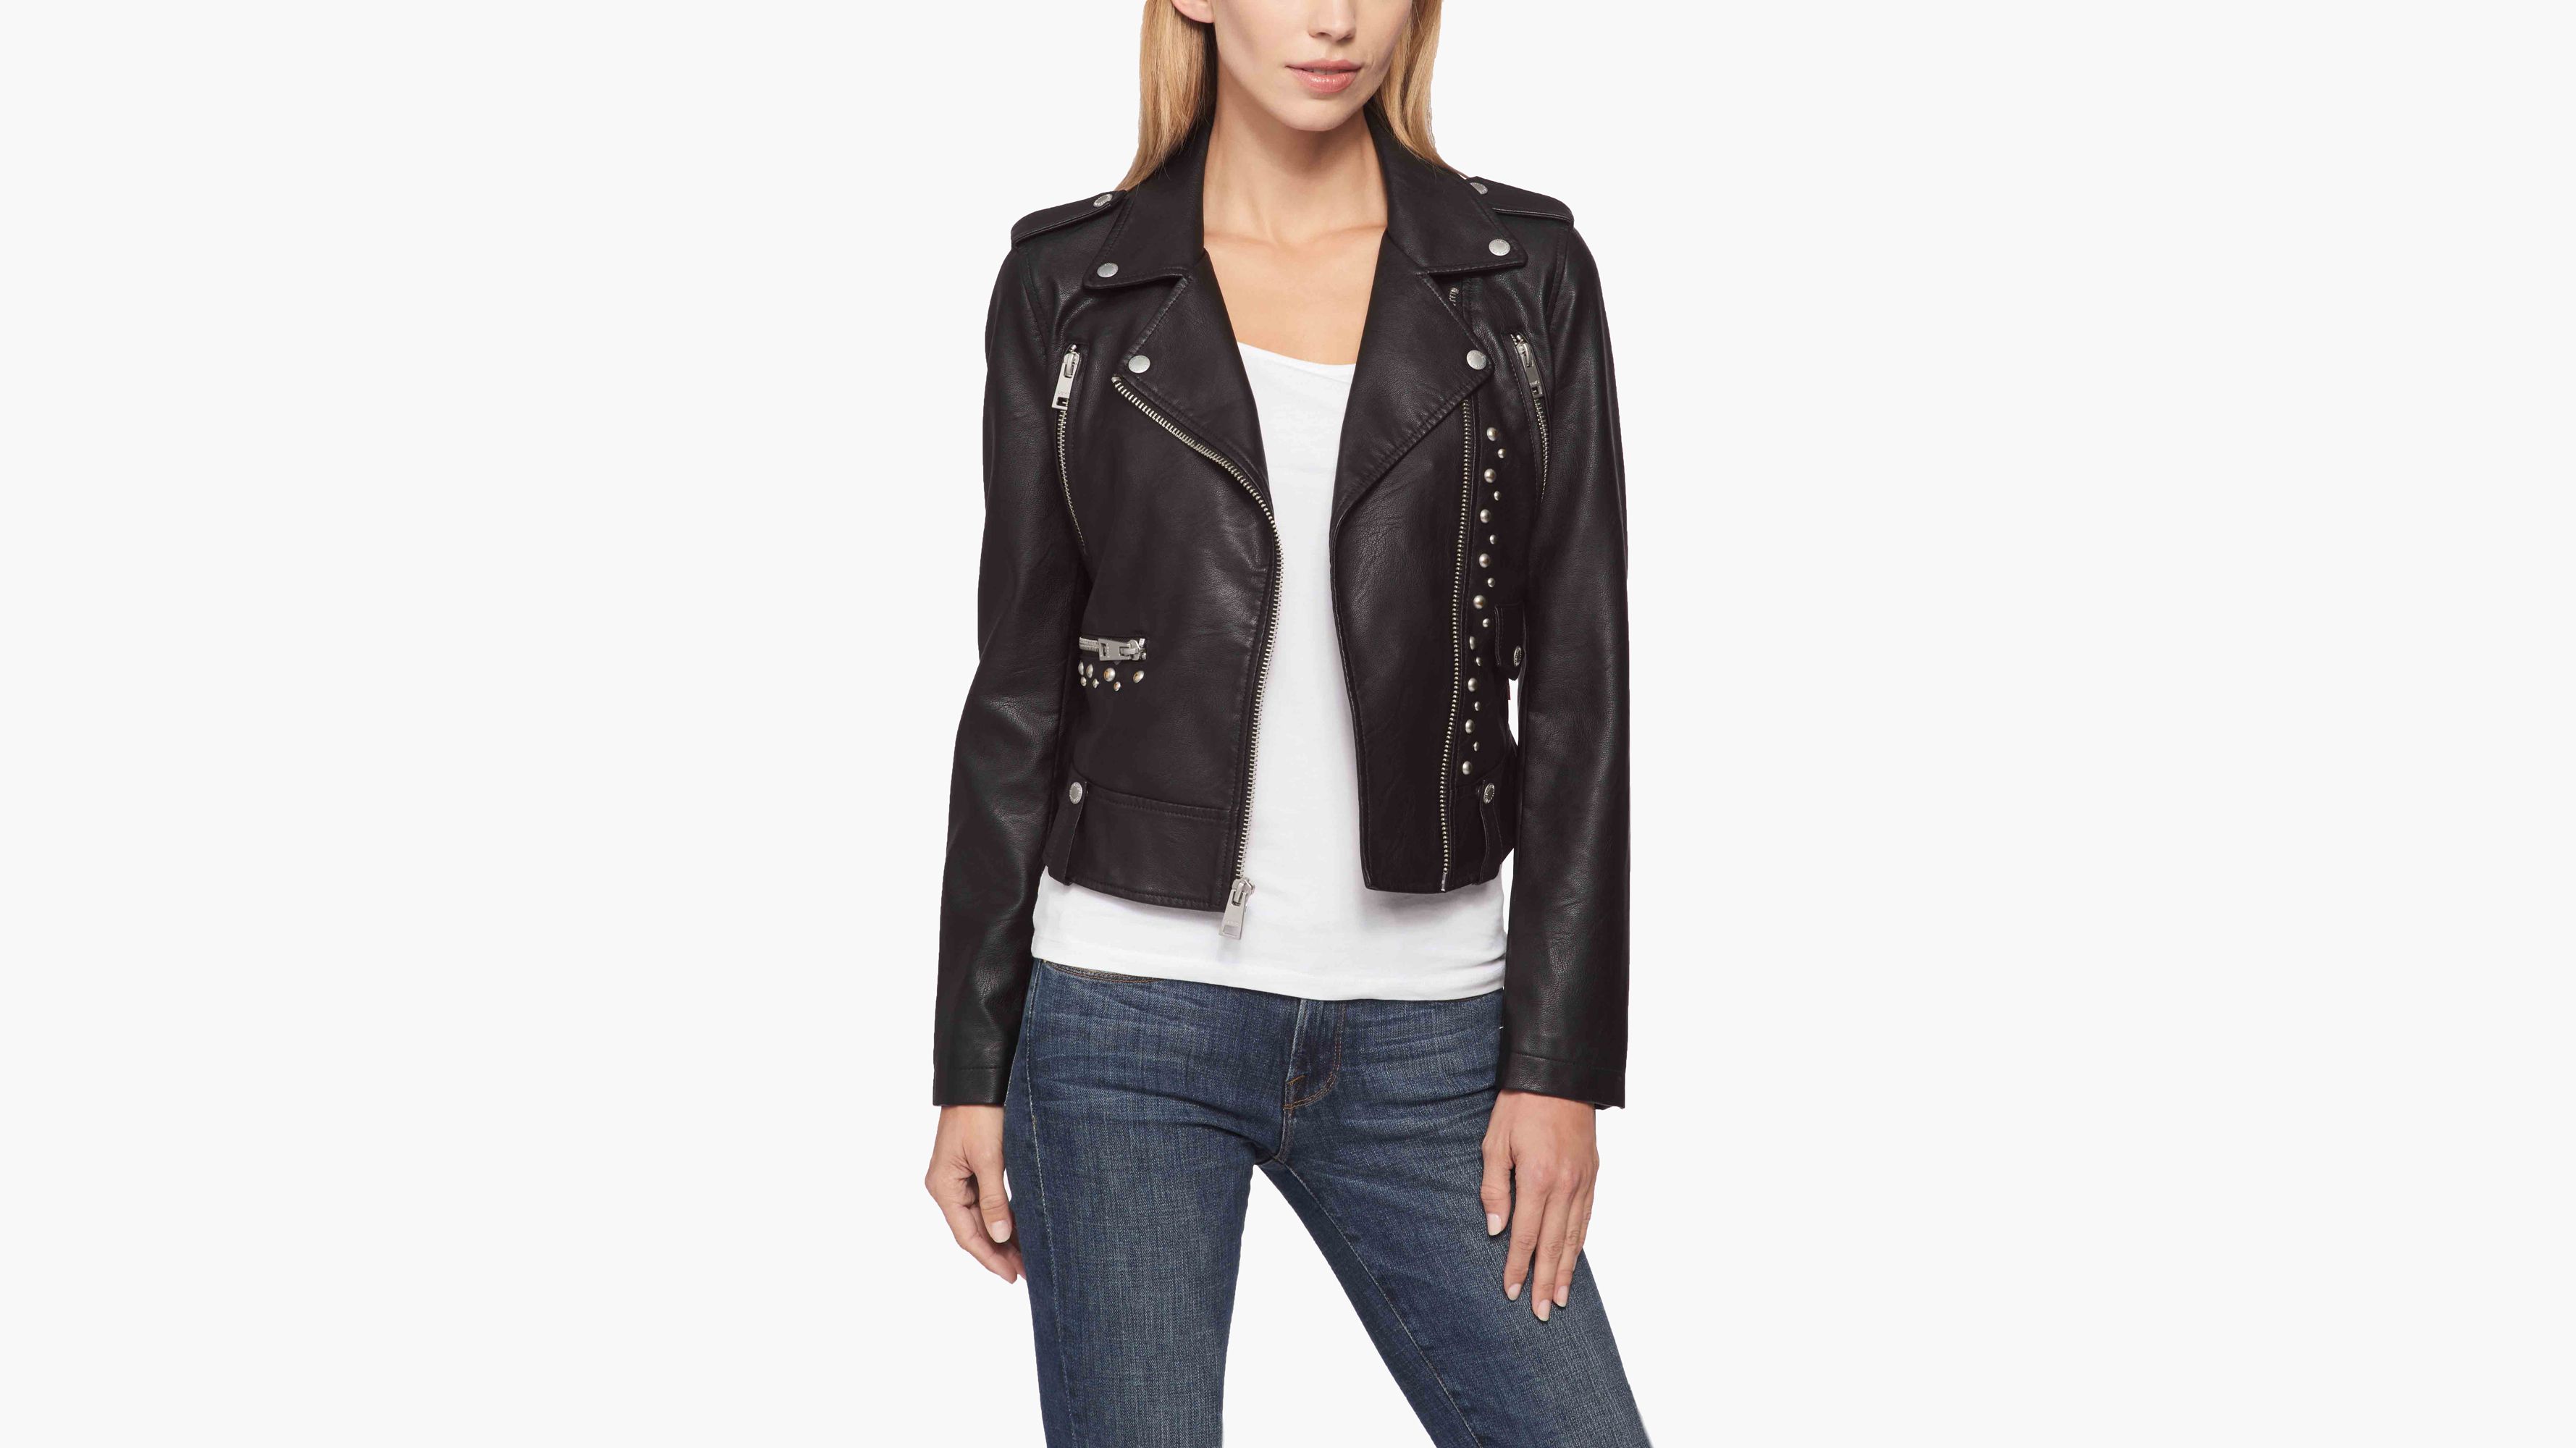 levis leather motorcycle jacket